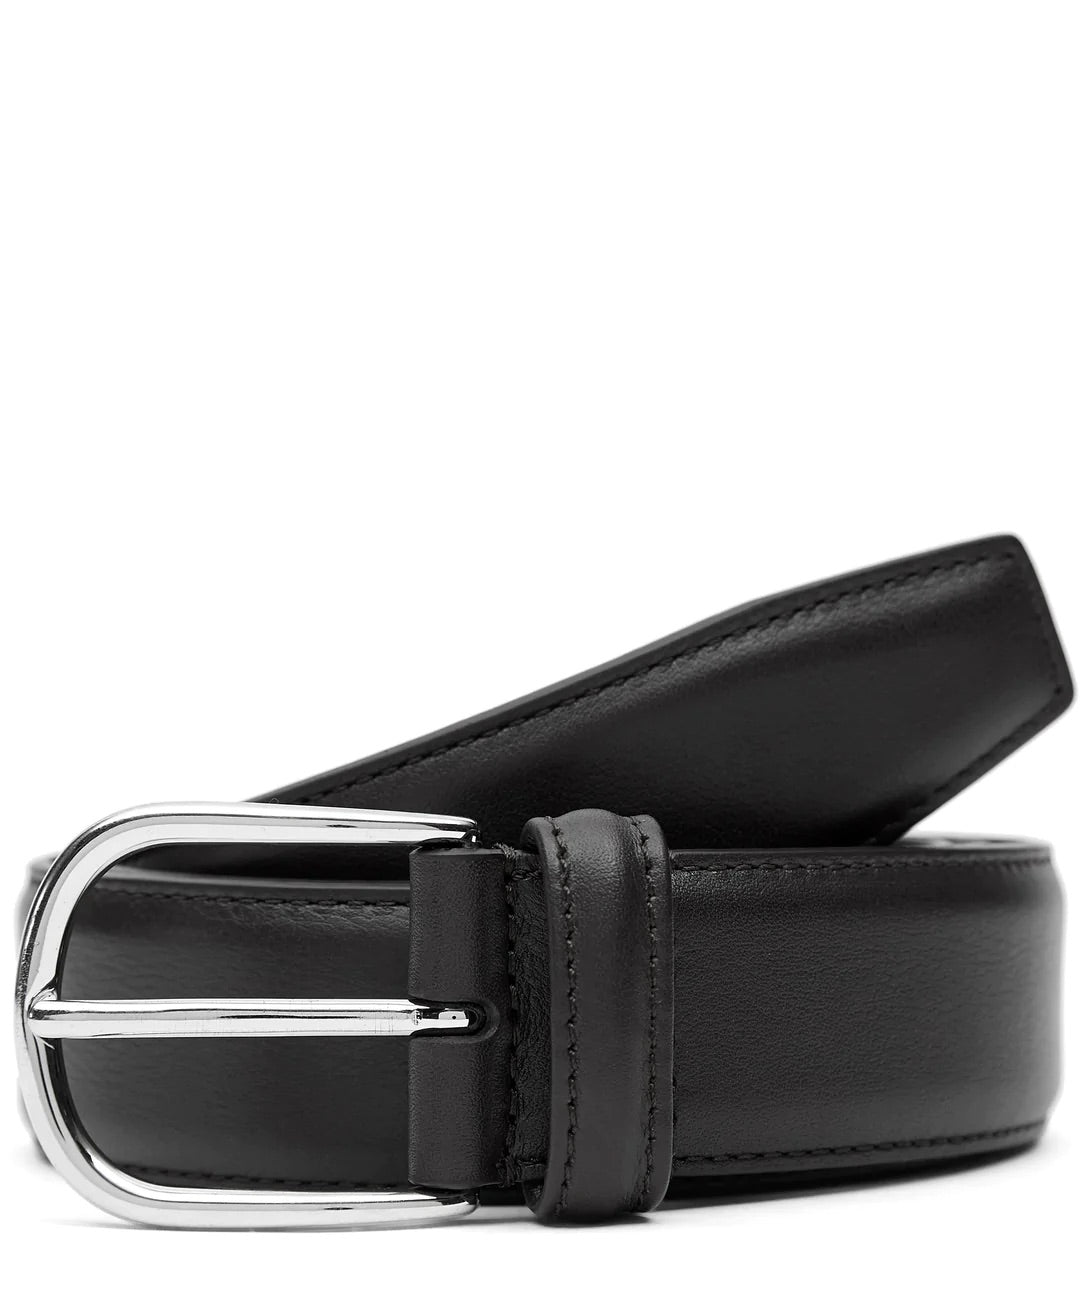 ANDERSON'S Nappa Leather Belt | Black